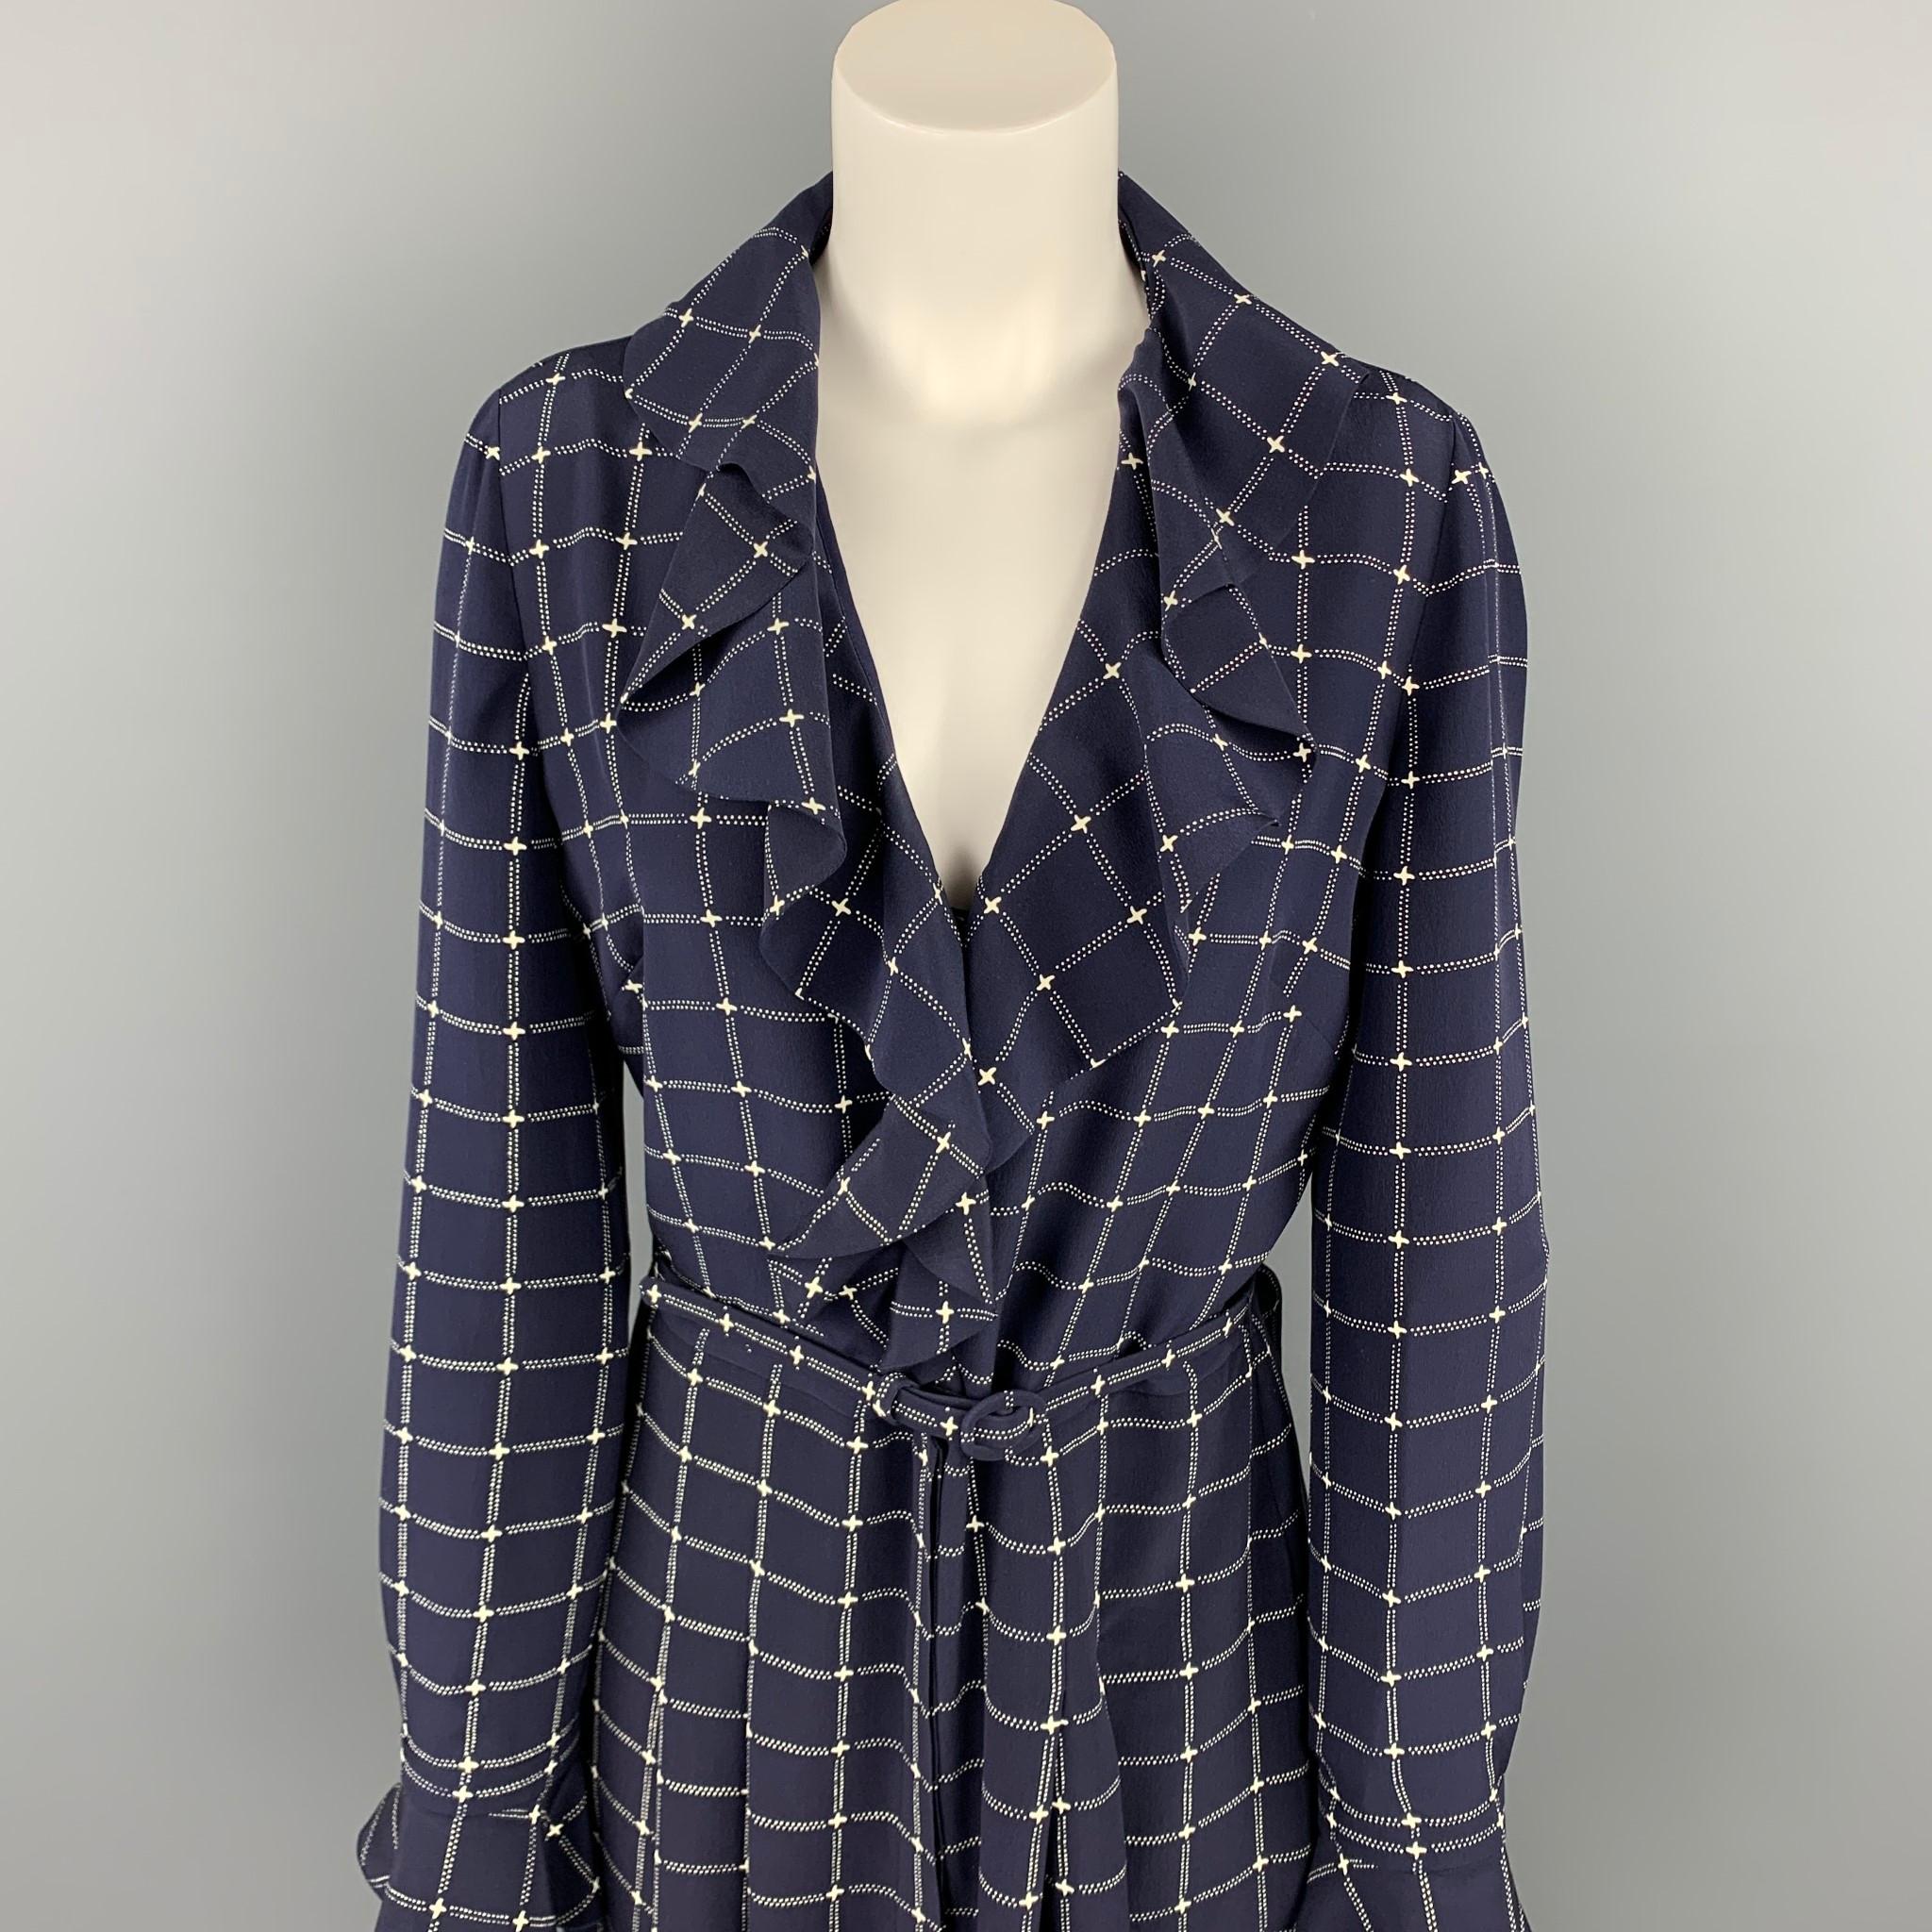 RALPH LAUREN Collection dress comes i a navy & white checkered silk featuring a a-line skirt, belted, ruffled, and a buttoned closure.

Very Good Pre-Owned Condition.
Marked: 8
Original Retail Price: $2,490.00

Measurements:

Shoulder: 16 in.
Bust: